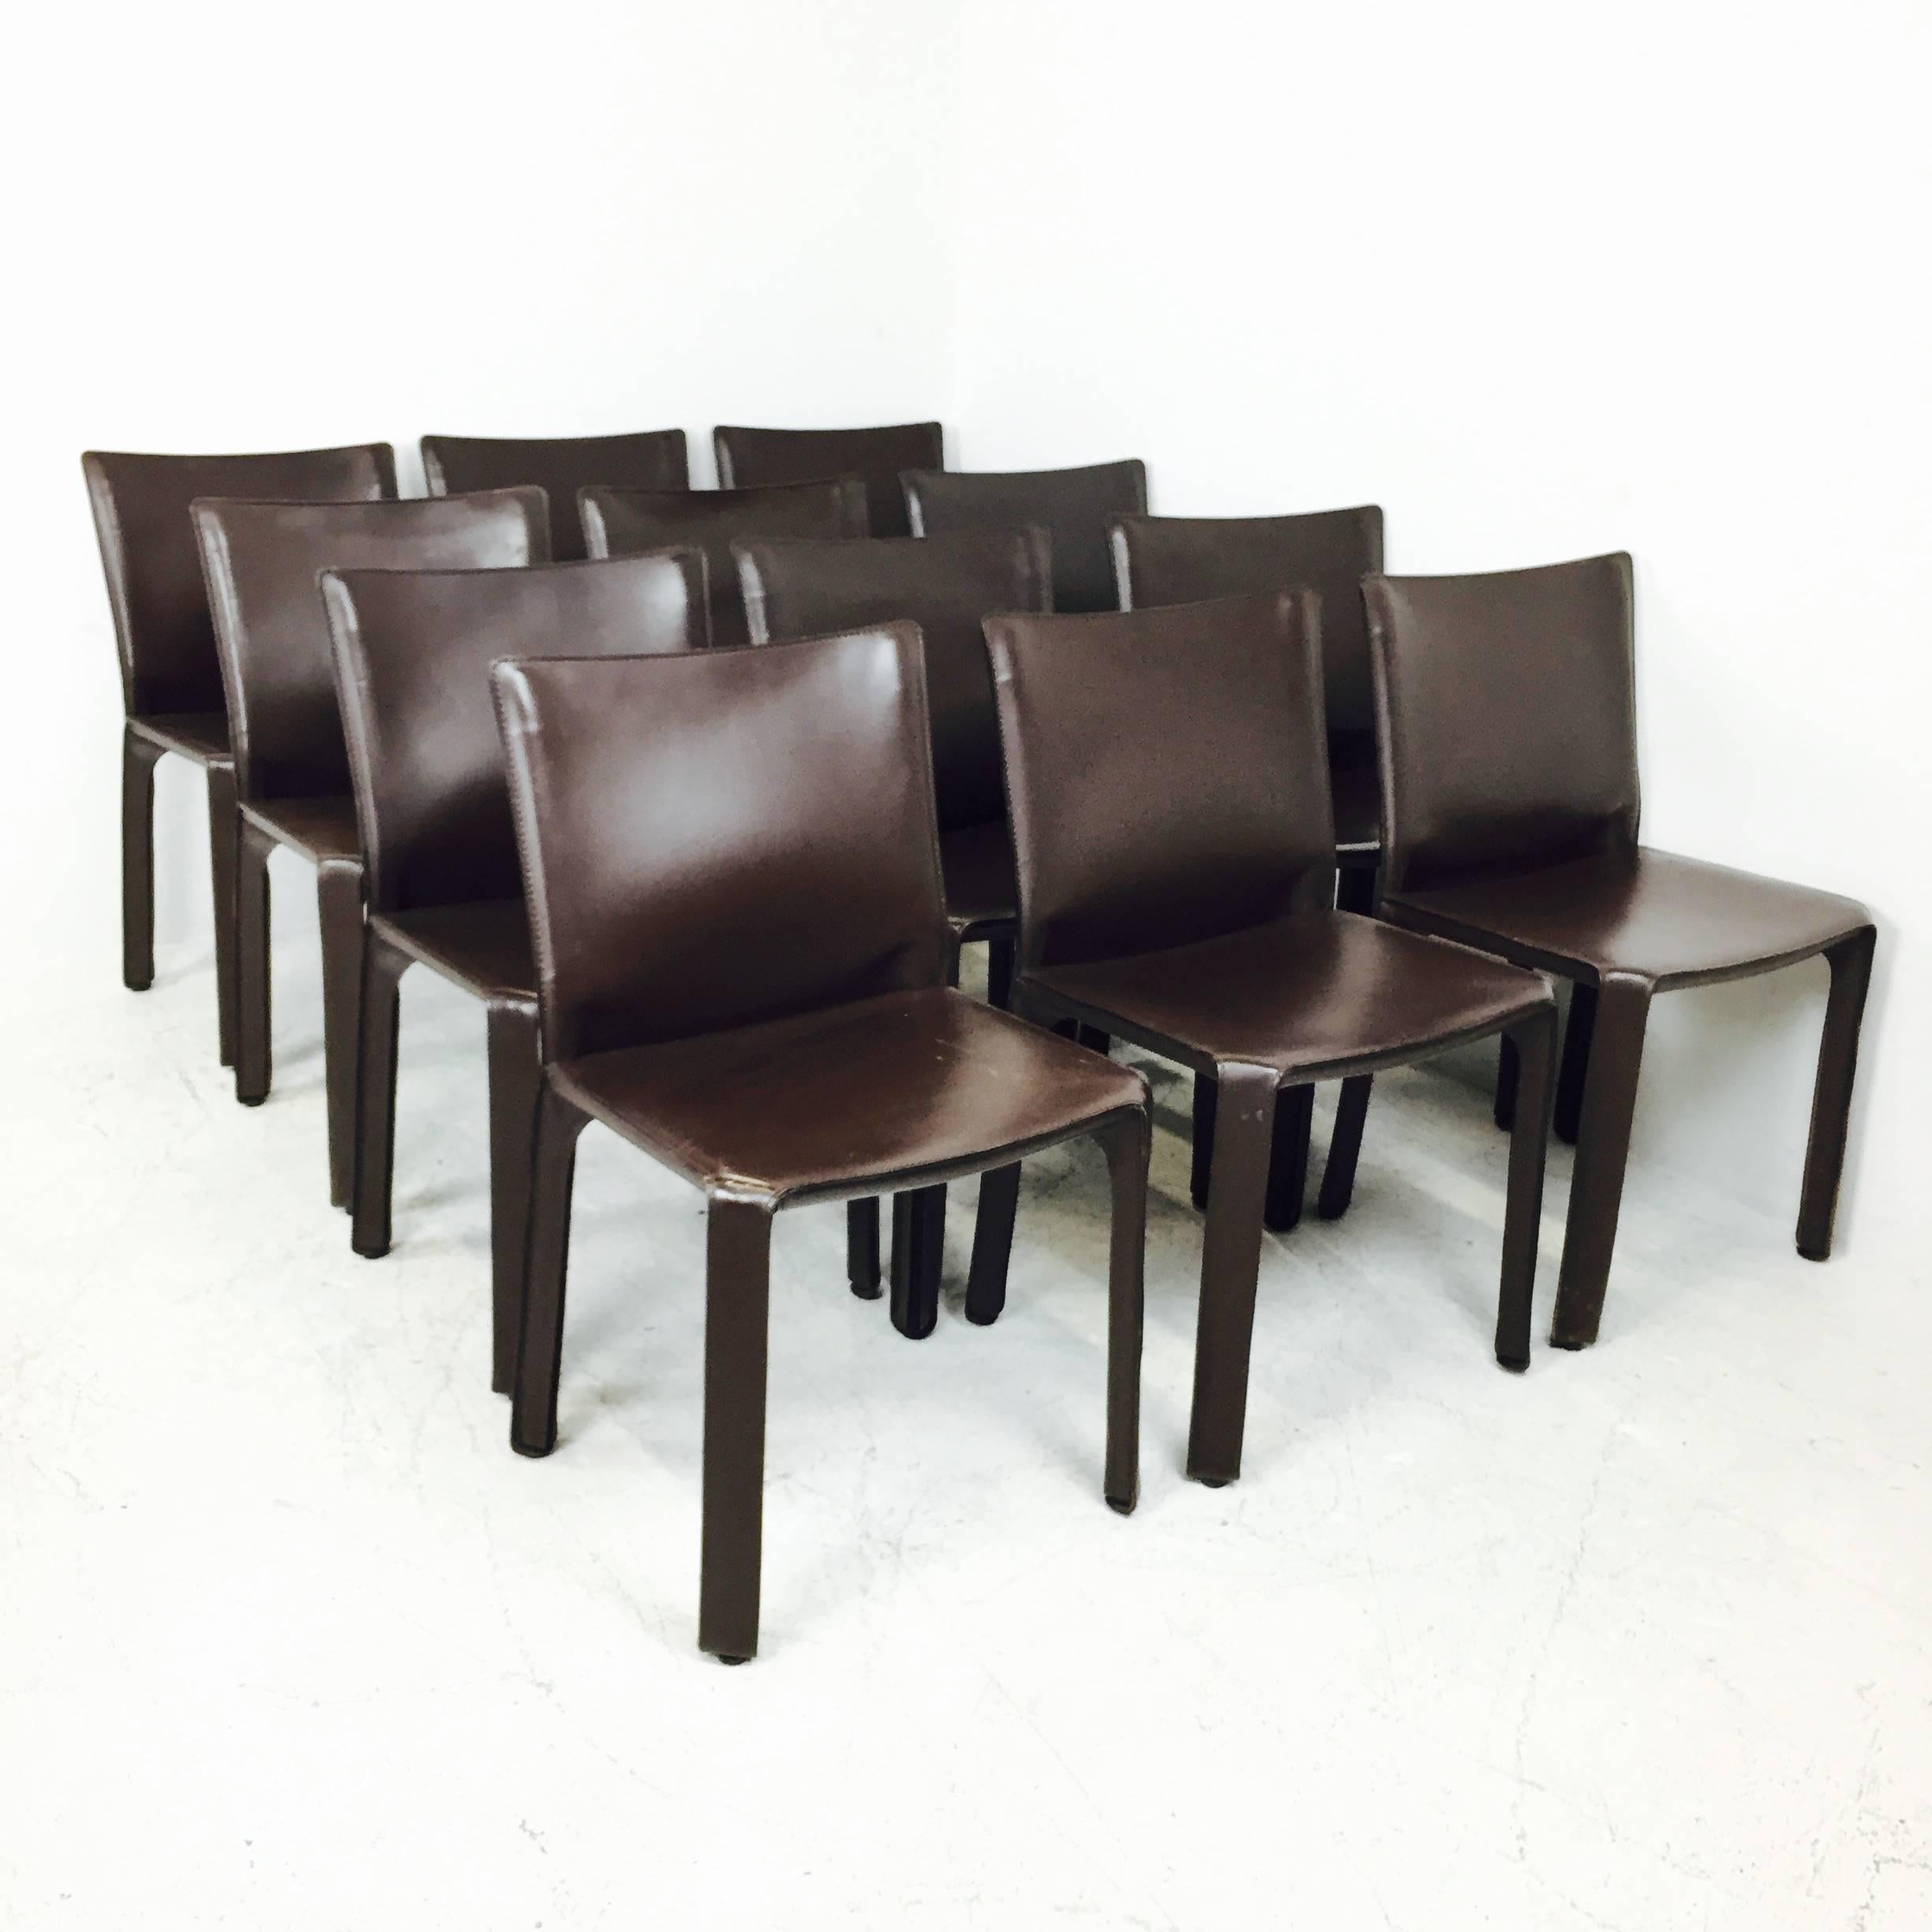 Marion Bellini cab chairs for Cassina in espresso brown. There is visible wear on the leather, circa 1980s.
 3 chairs available. Contact for more information on condition of chairs.

Dimensions: 19